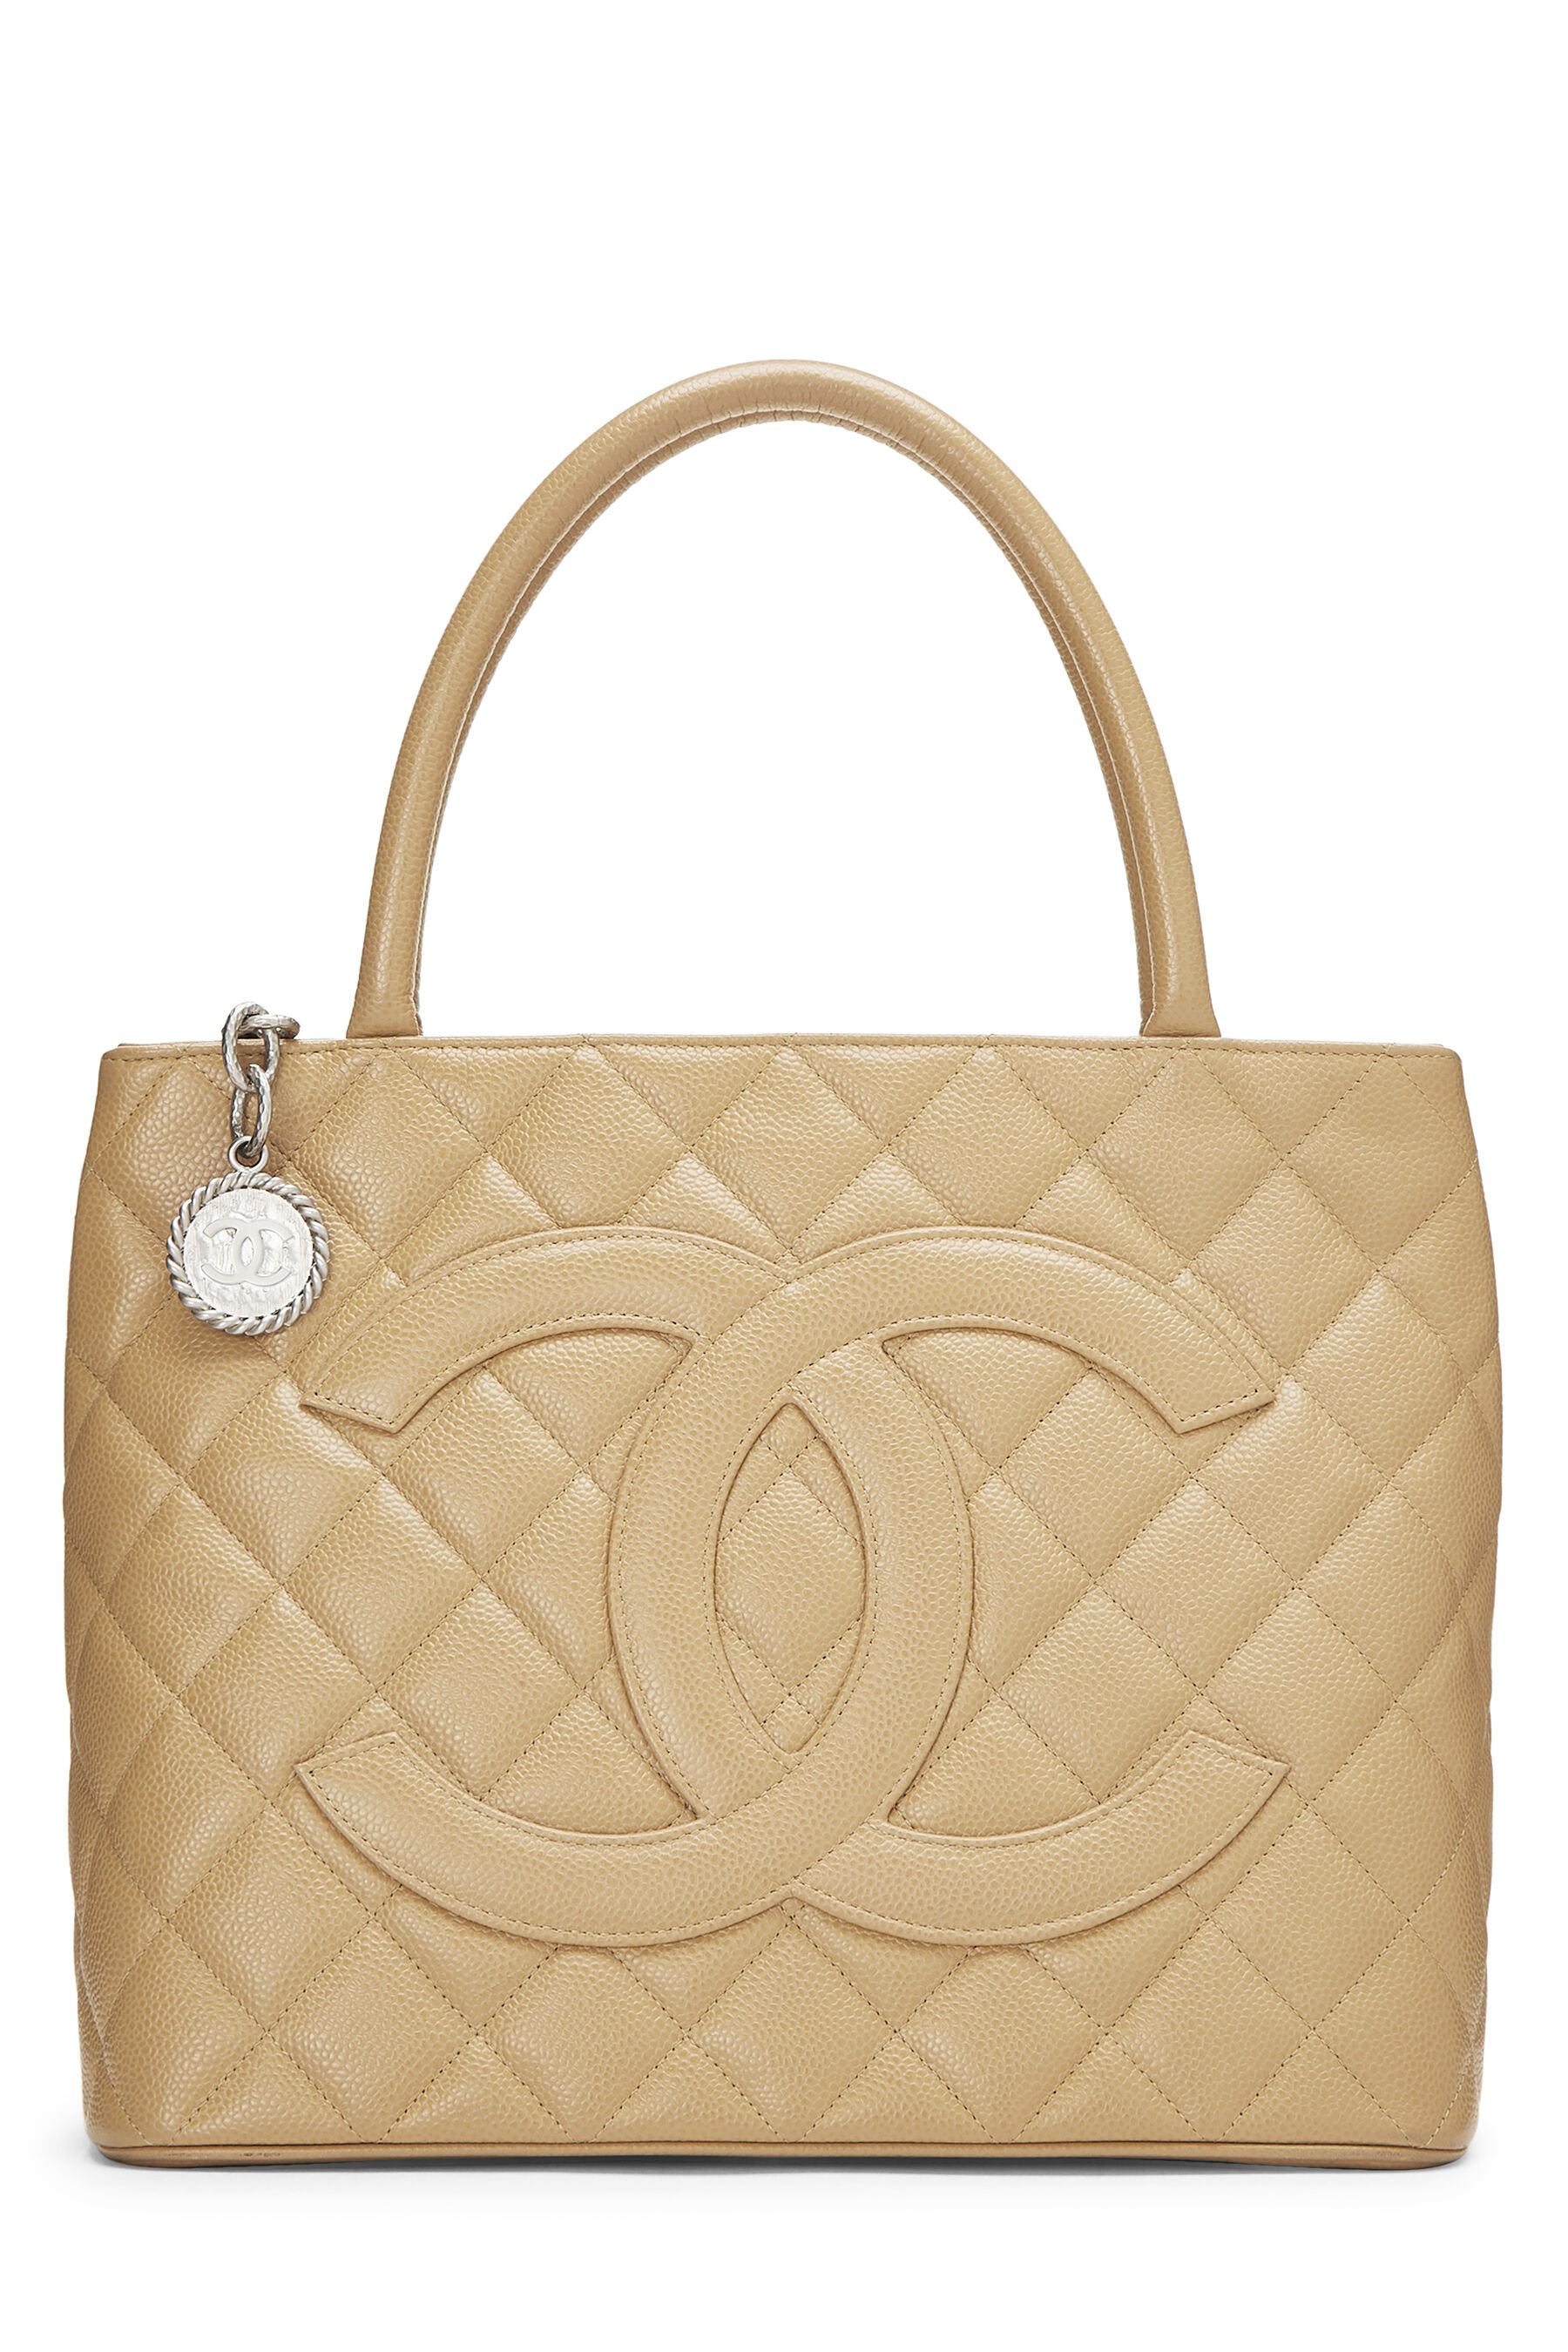 Chanel - Beige Quilted Caviar Medallion Tote